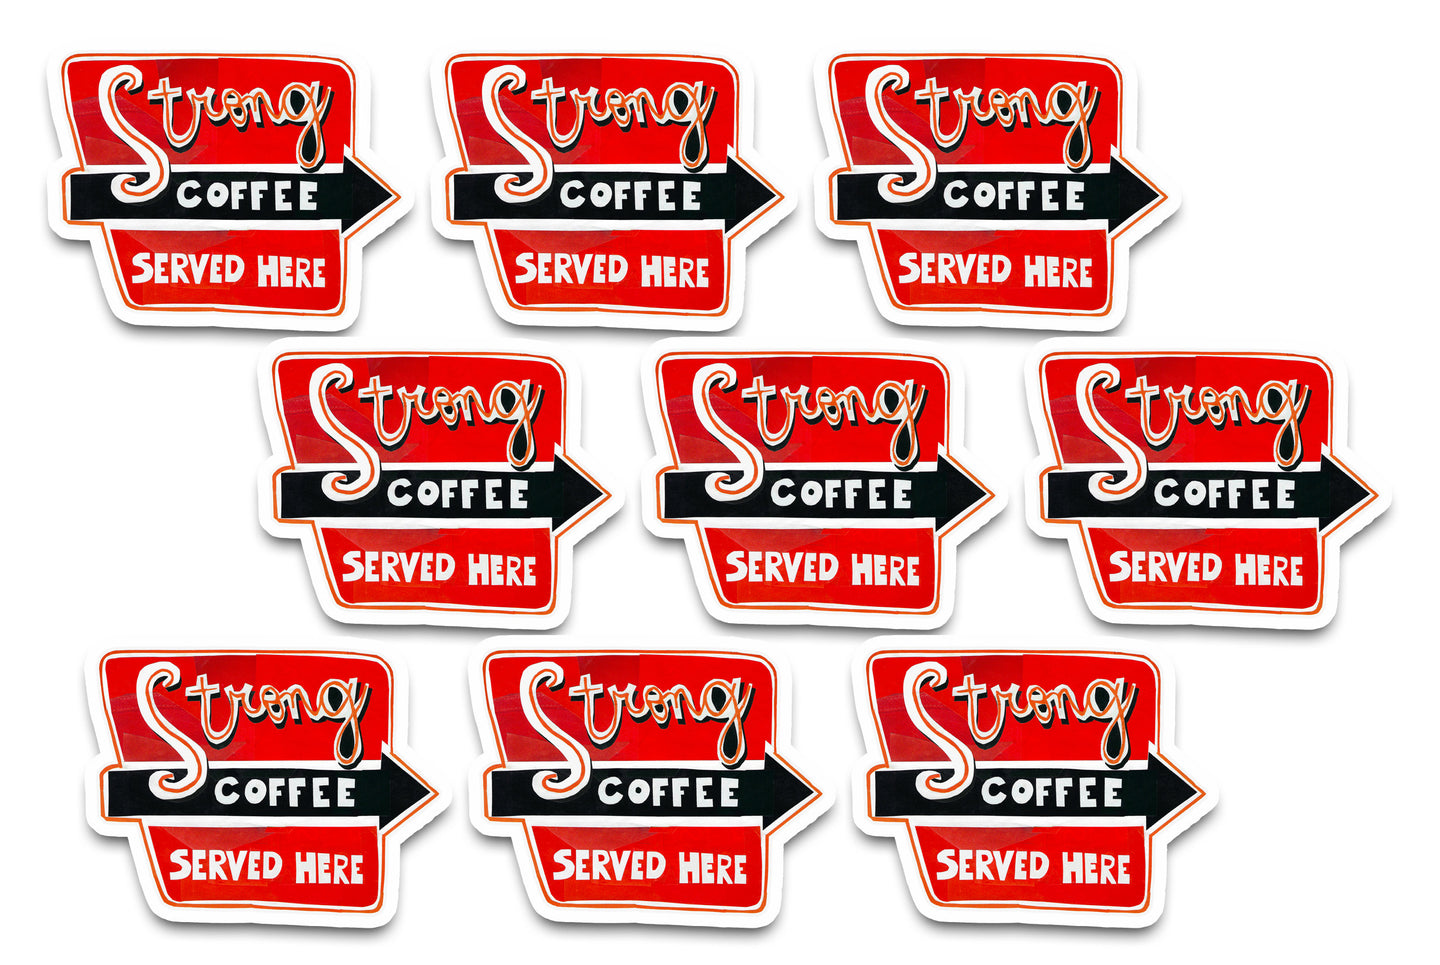 Strong Coffee Served Here Sign Art Sticker Set